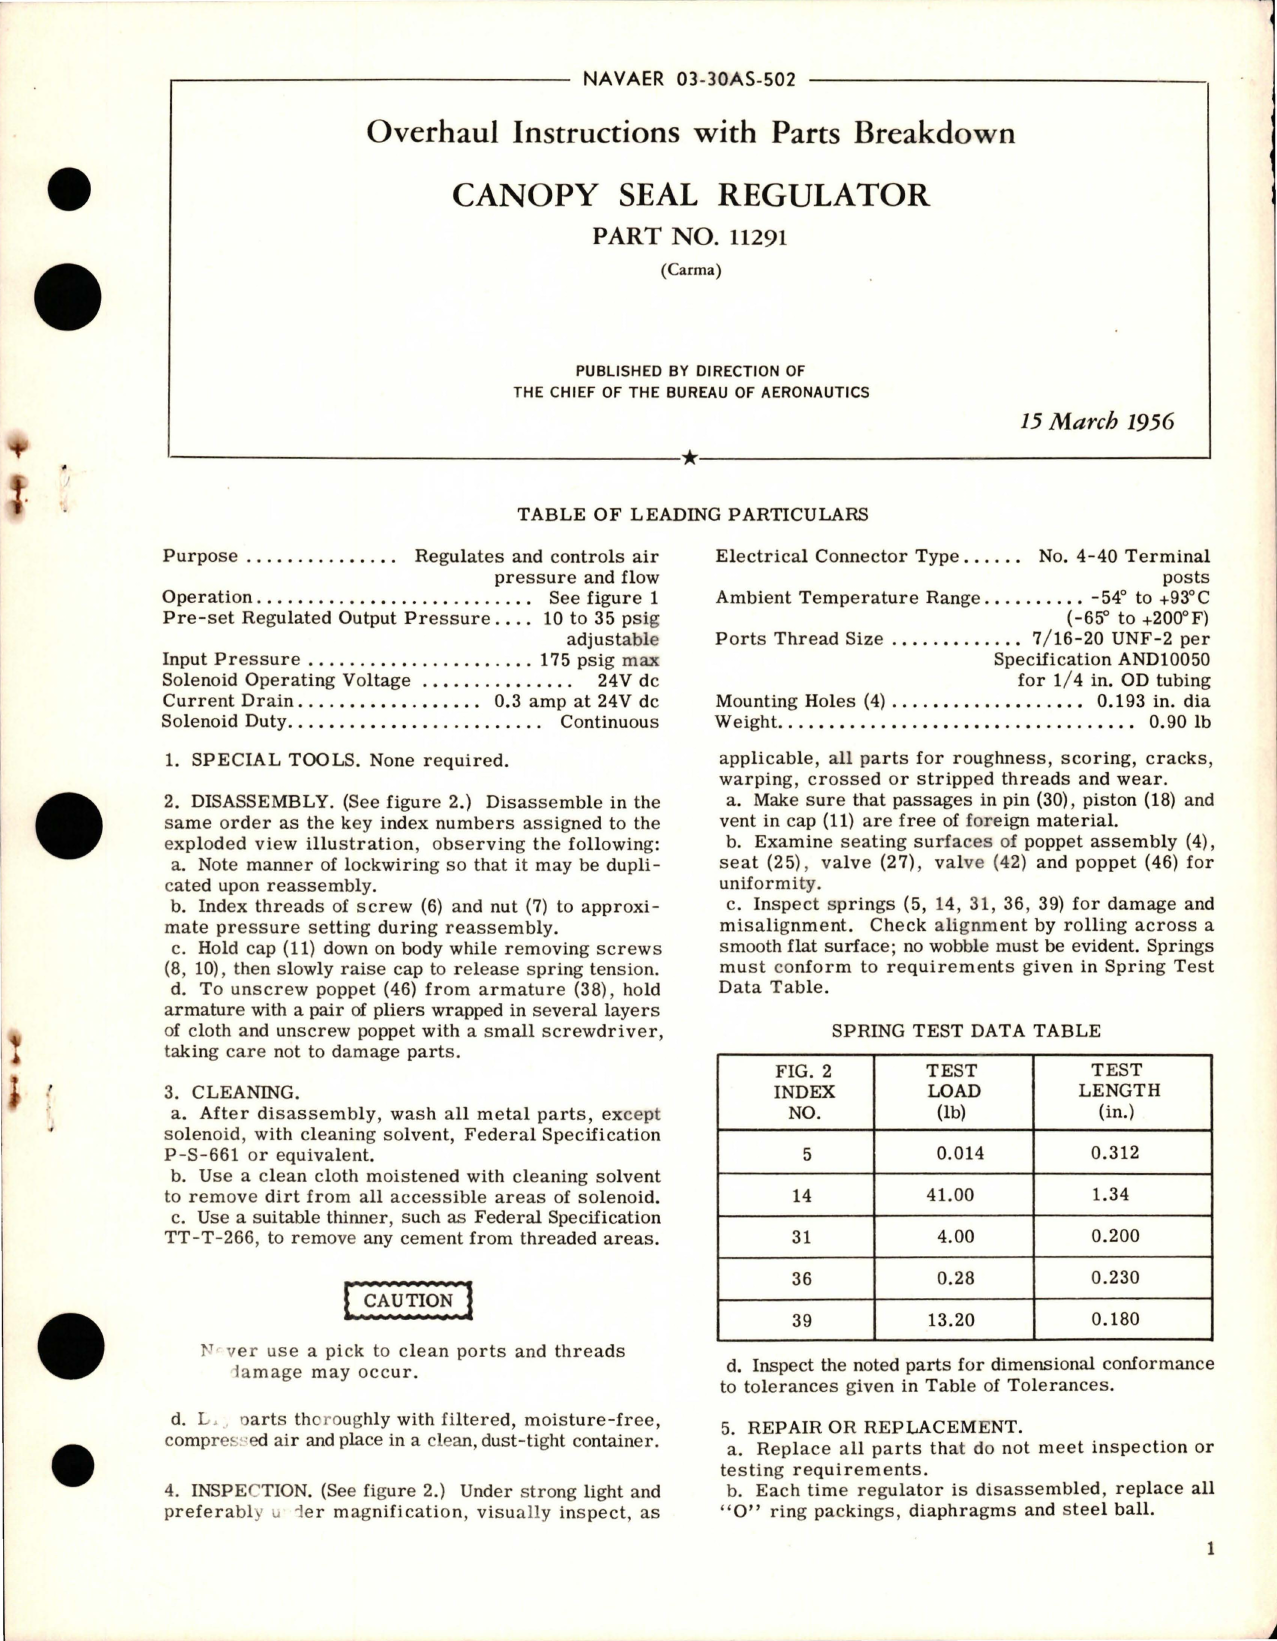 Sample page 1 from AirCorps Library document: Overhaul Instructions with Parts Breakdown for Canopy Seal Regulator - Part 11291 